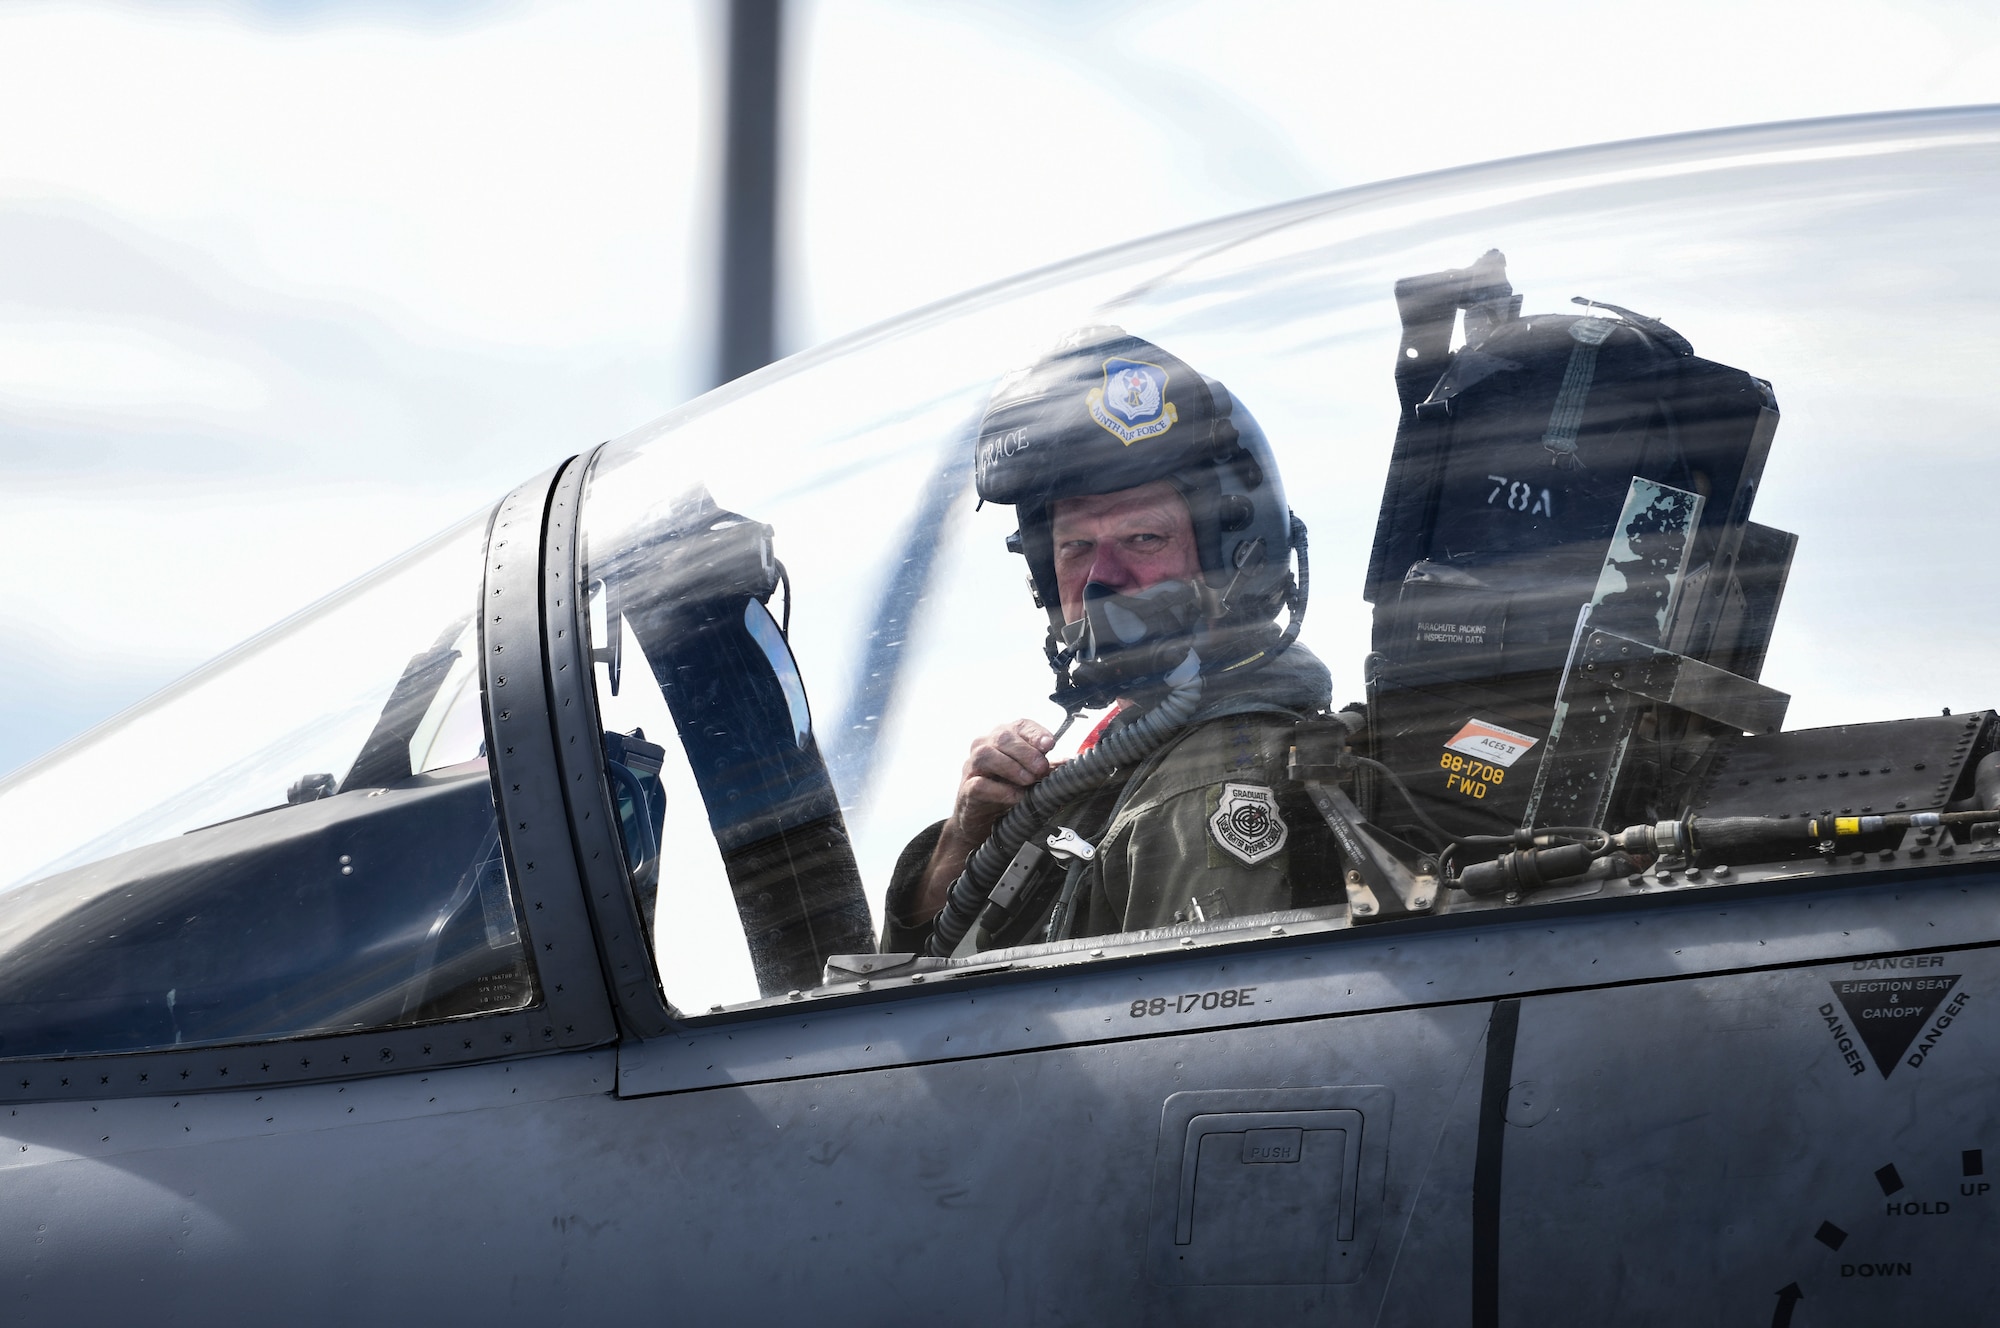 U.S. Air Force Gen. Mark Kelly, commander of Air Combat Command, prepares to disembark an F-15E Strike Eagle at Tyndall Air Force Base, Florida, Sept. 28, 2020. Kelly visited Tyndall as part of his tour as the new ACC commander where he was briefed on Tyndall’s rebuild status and plans for the future. (U.S. Air Force photo by Senior Airman Stefan Alvarez)